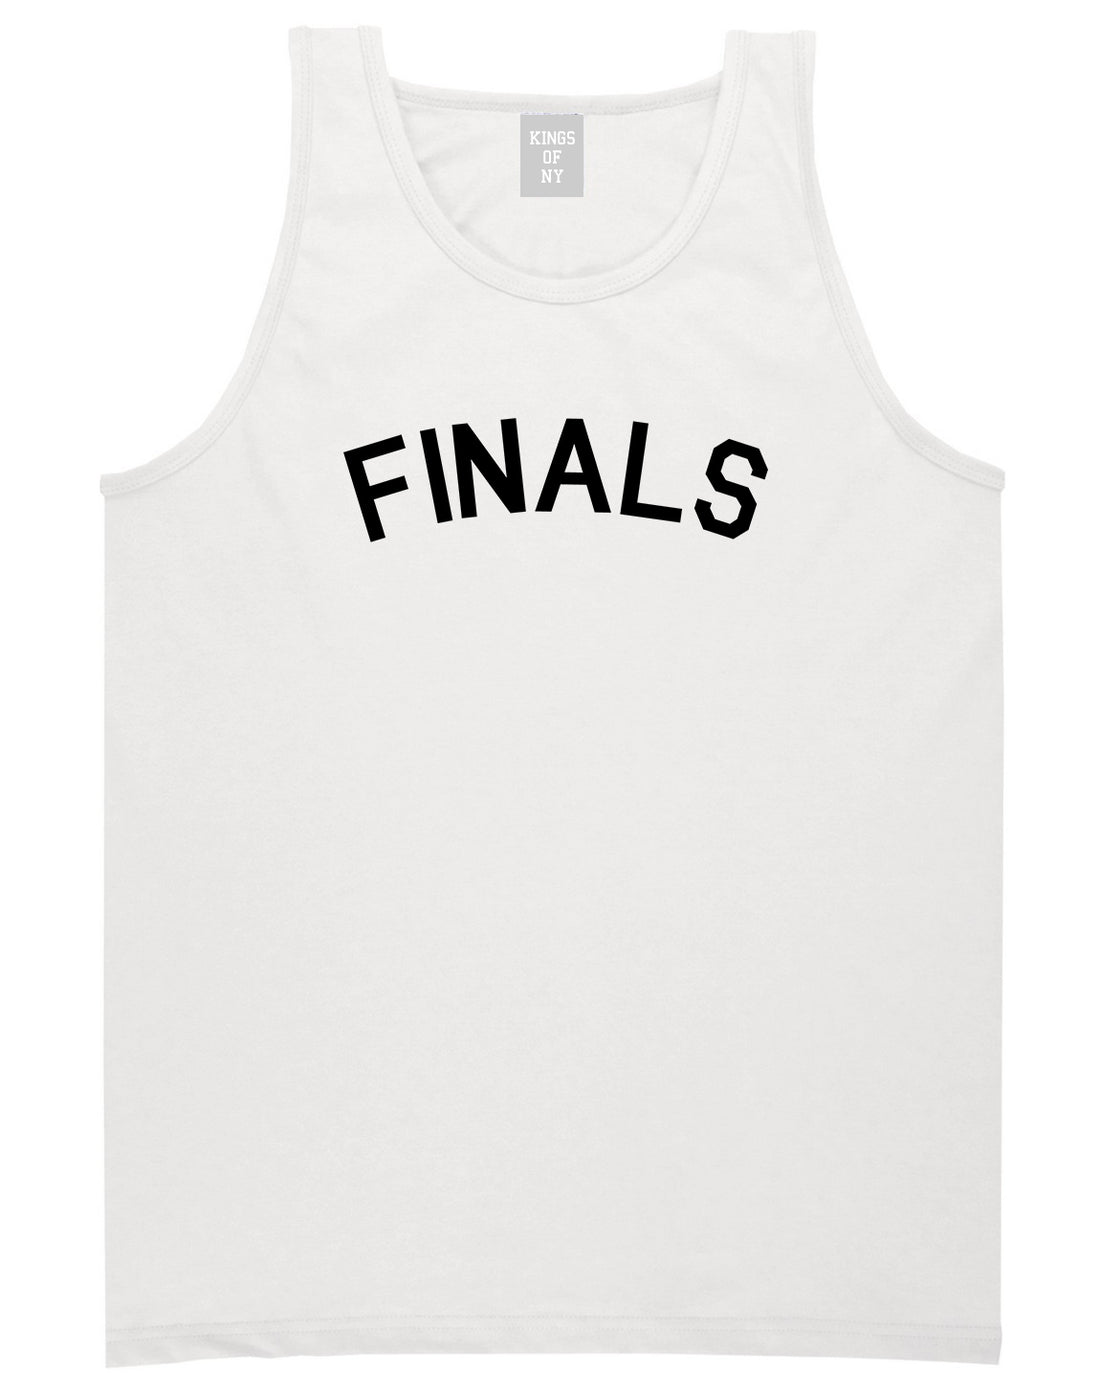 Finals Sports Mens White Tank Top Shirt by KINGS OF NY